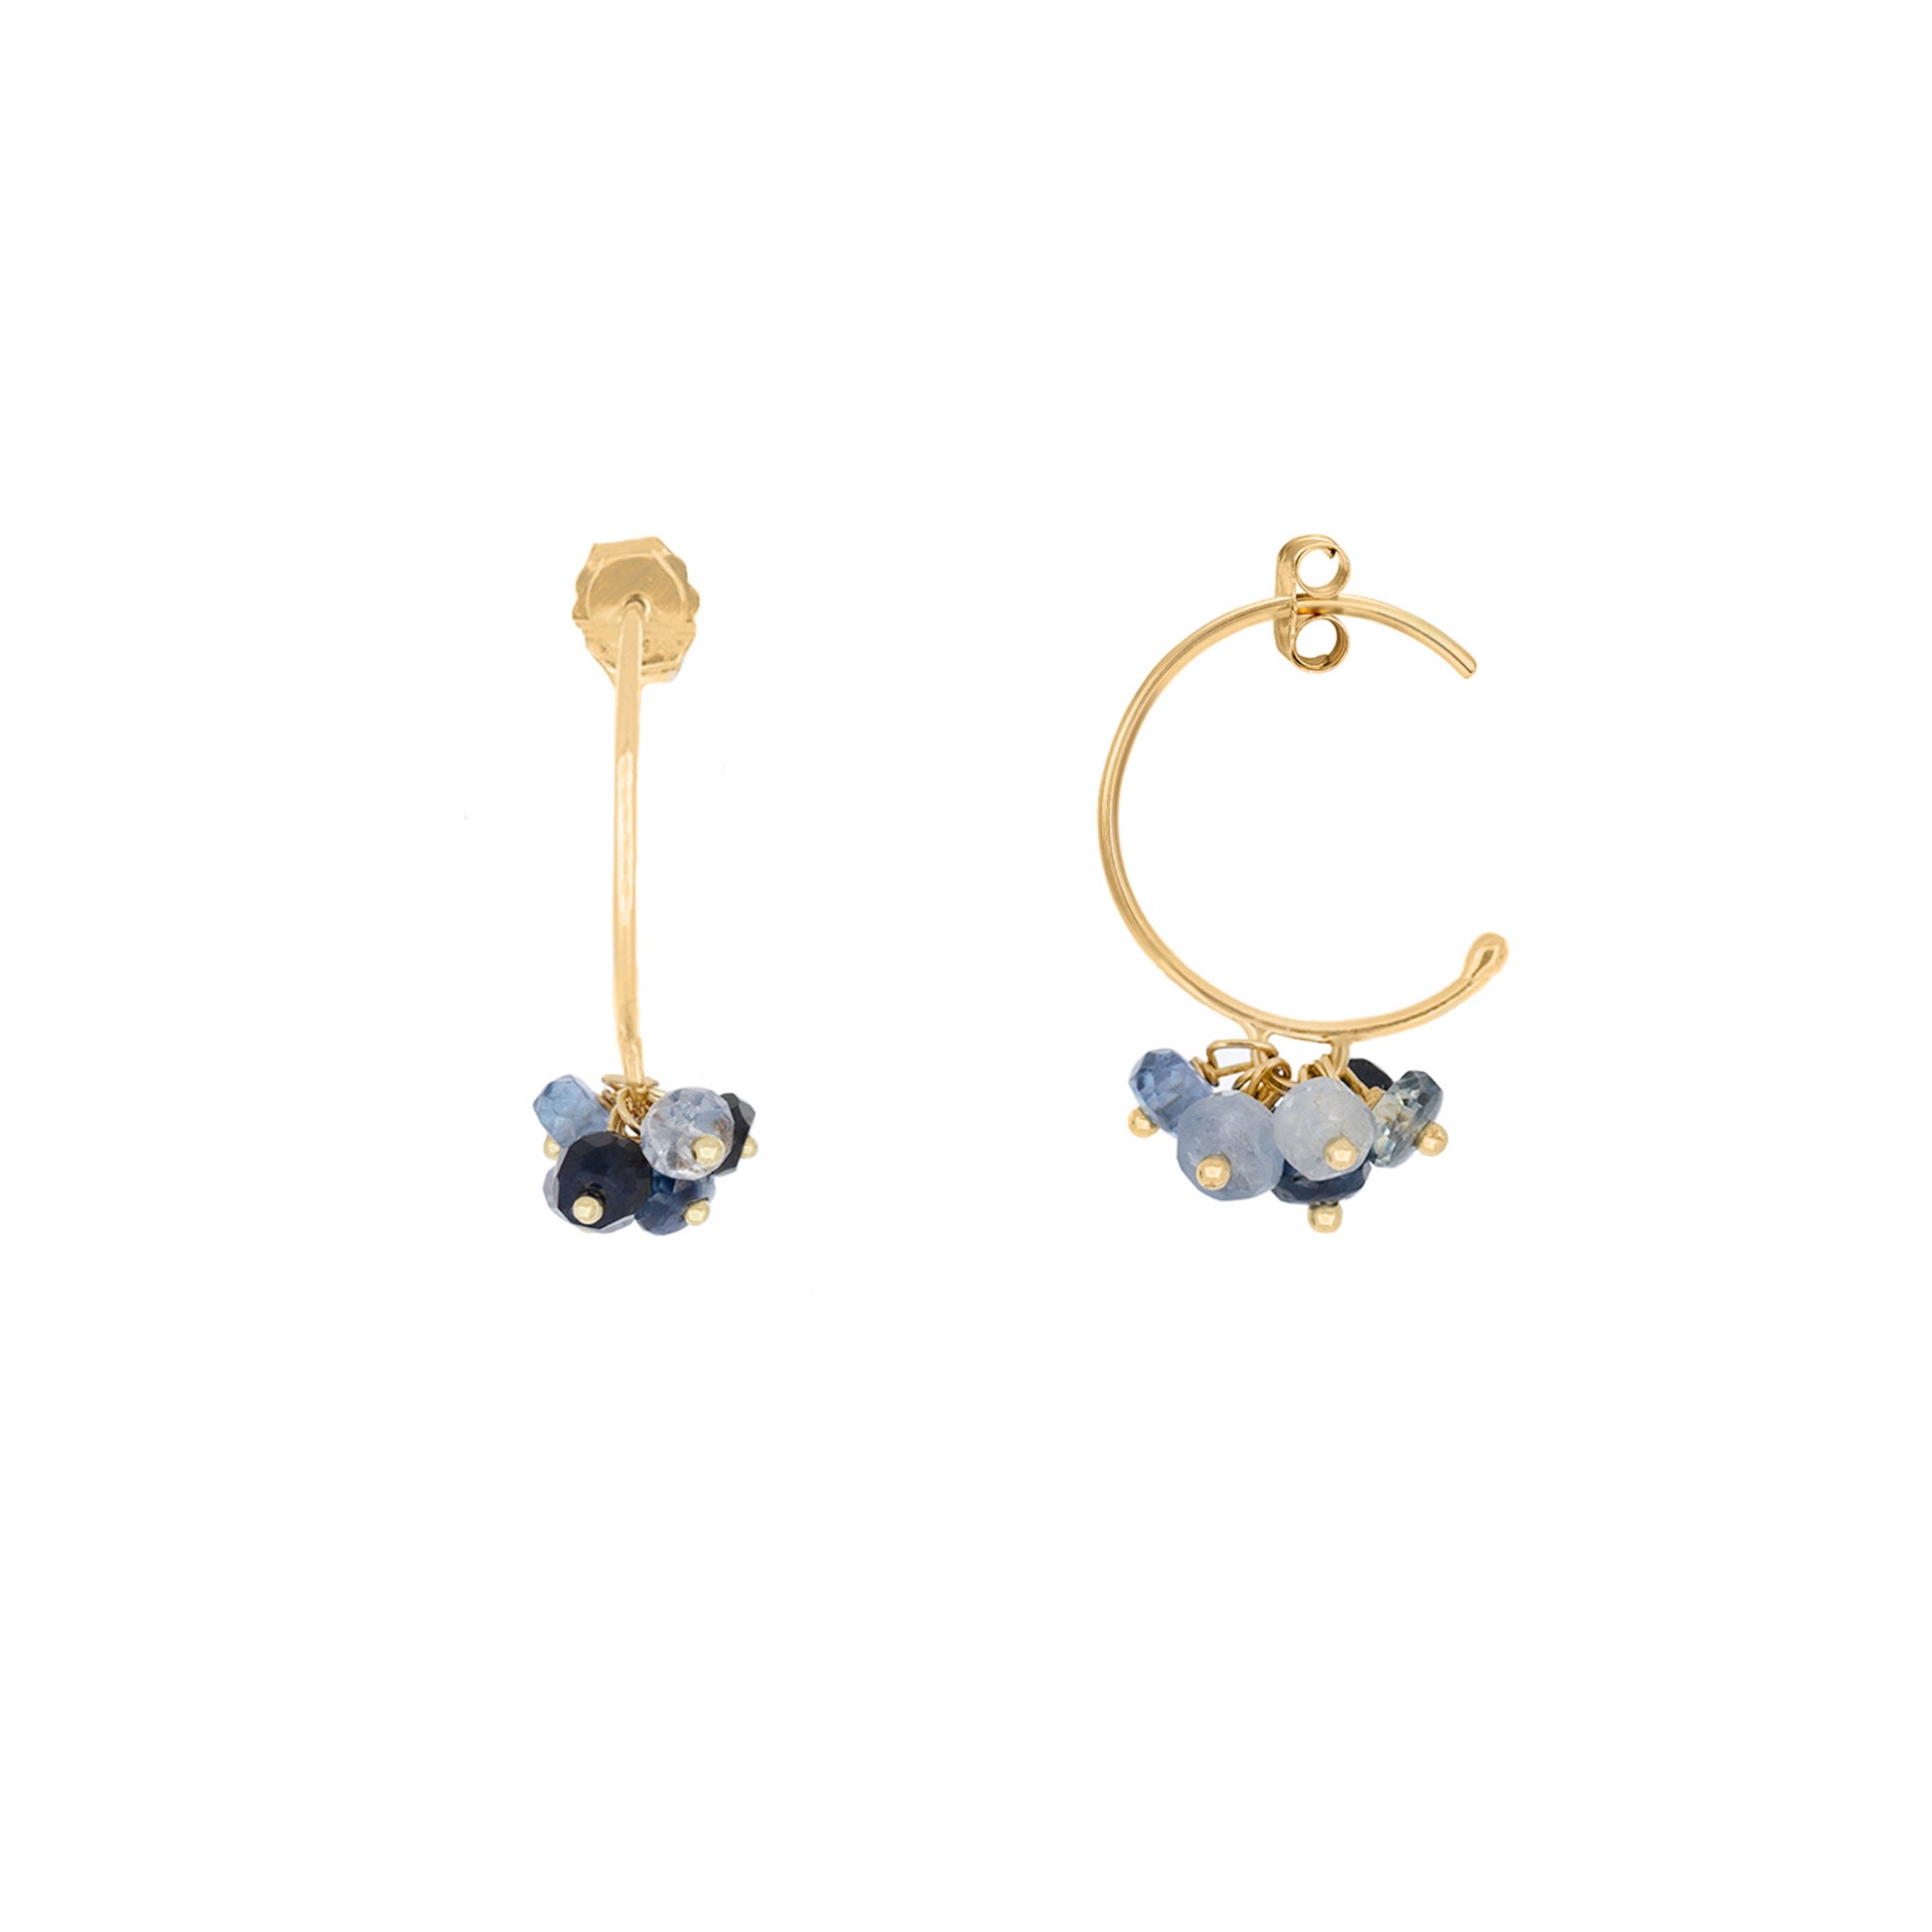 Sweet Pea Pogo Punk 18ct yellow gold small hoops with cluster of sapphire beads in varying shades.